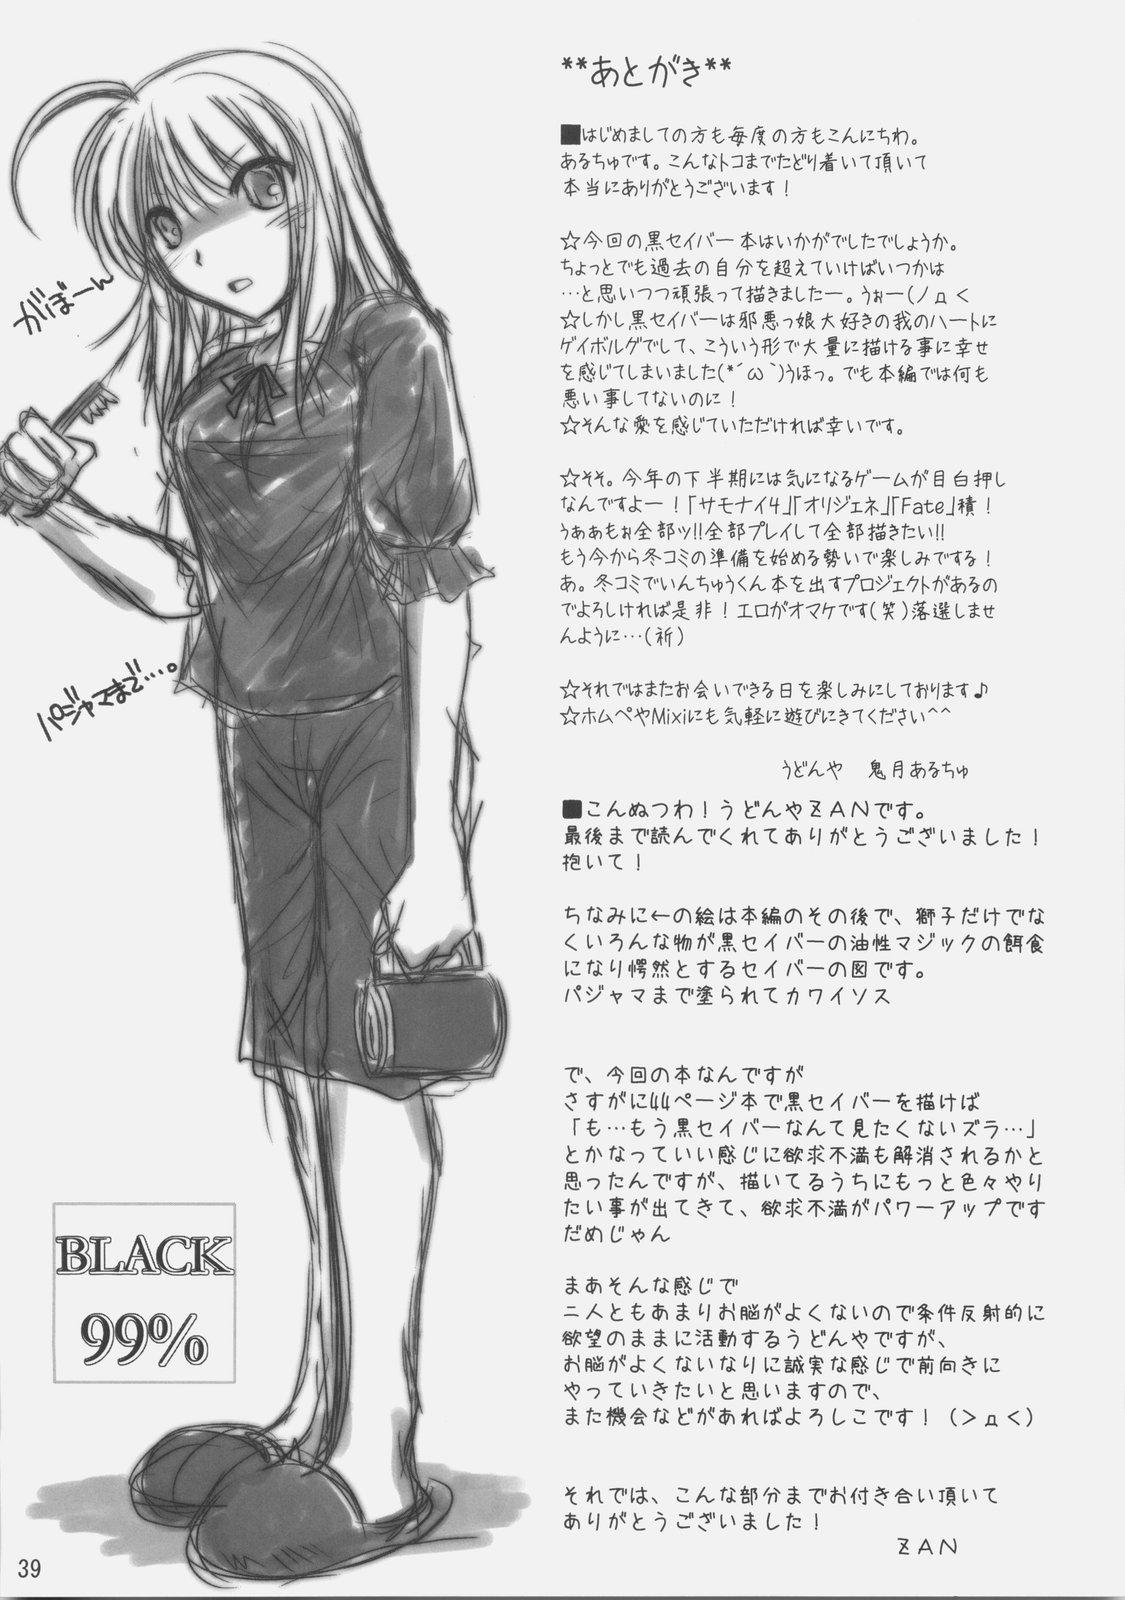 Sextoy BLACK 99% - Fate hollow ataraxia Dirty - Page 38